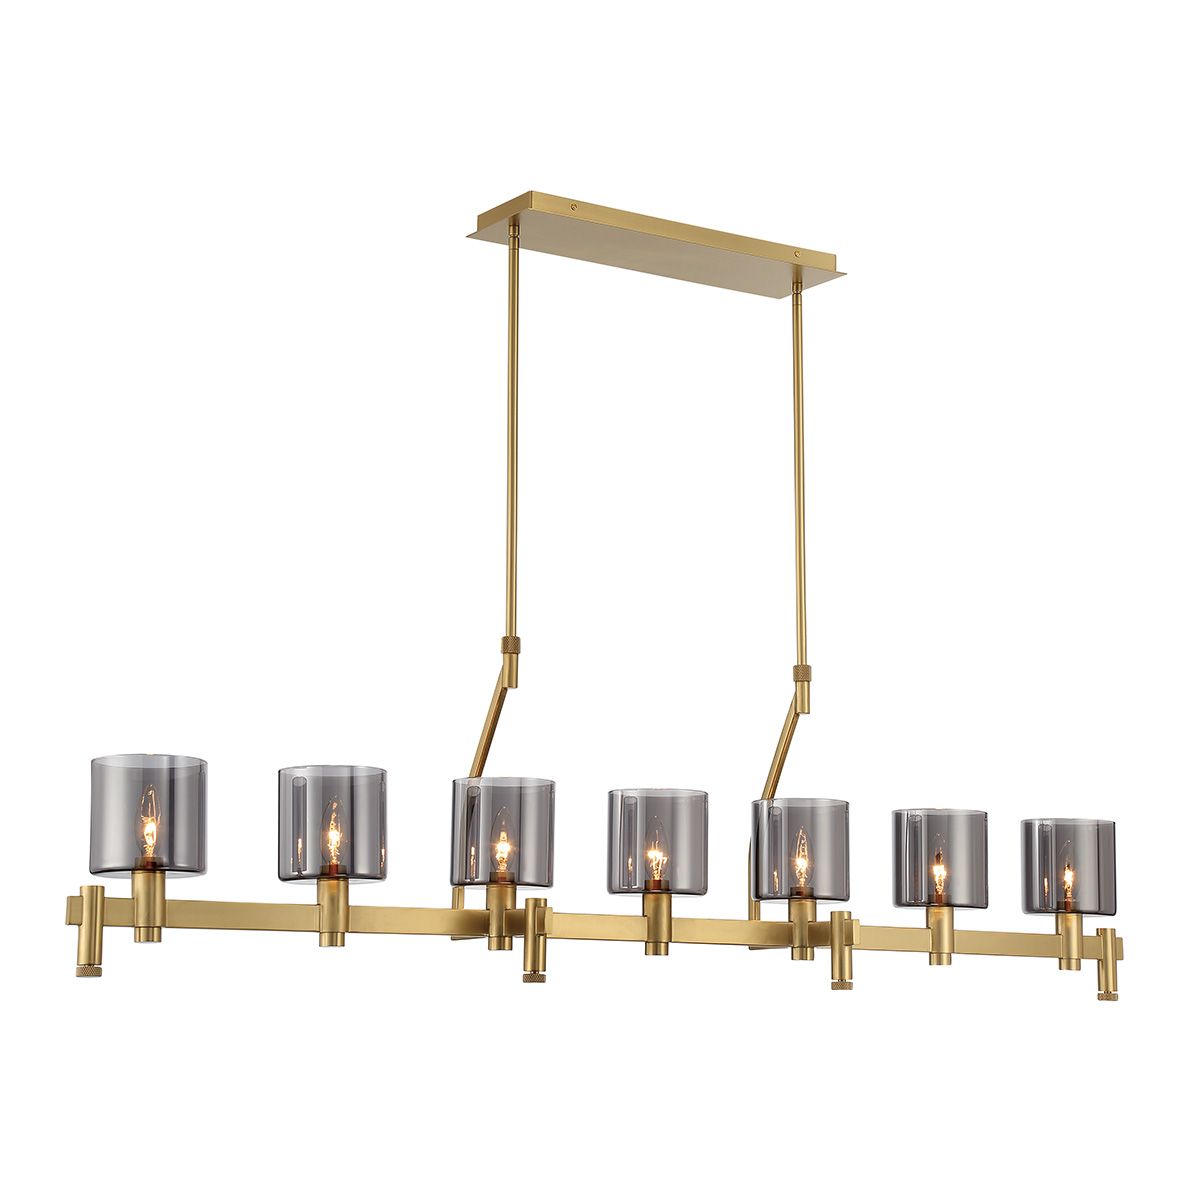 Decato 7 Lights 56 in. Chandelier Gold Finish